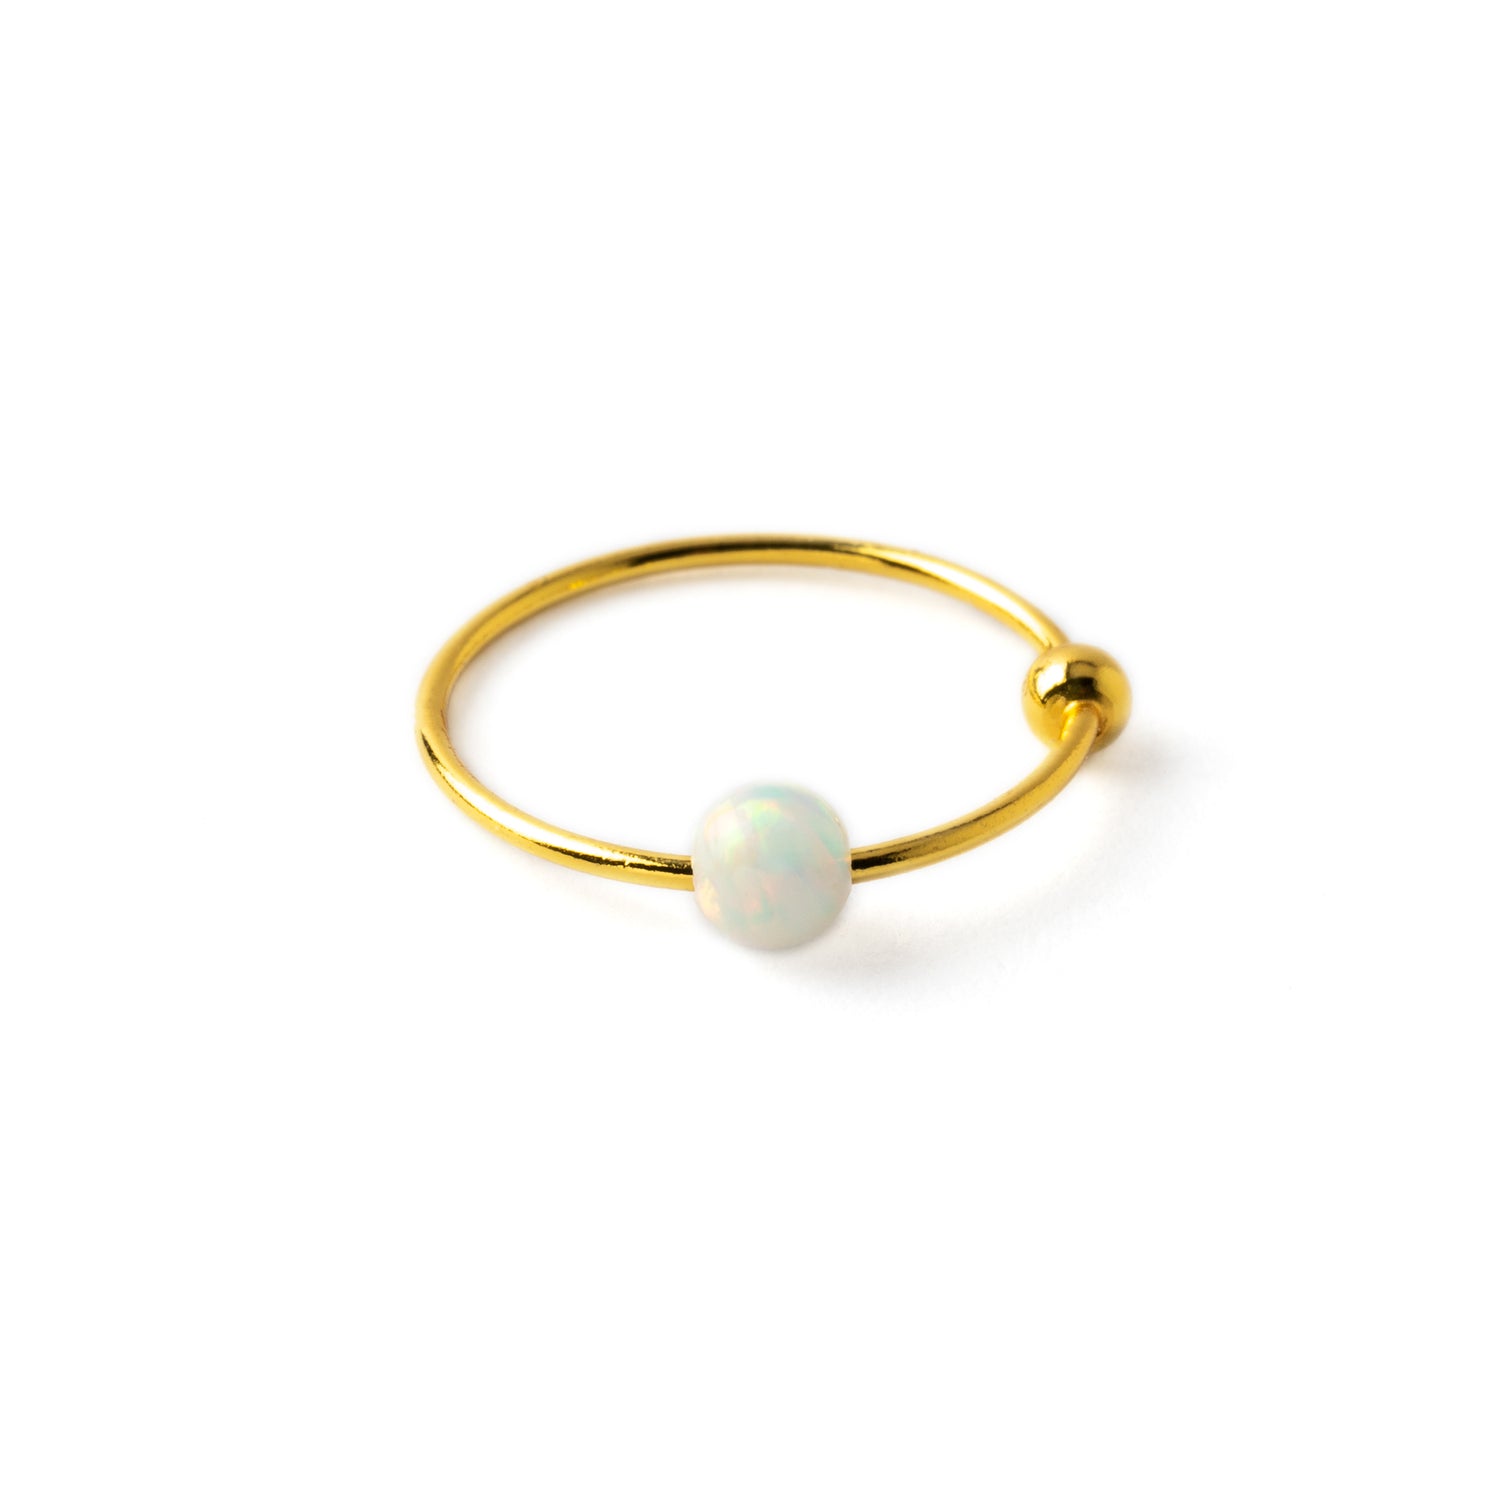 18k Gold nose ring with white Opal bead frontal view